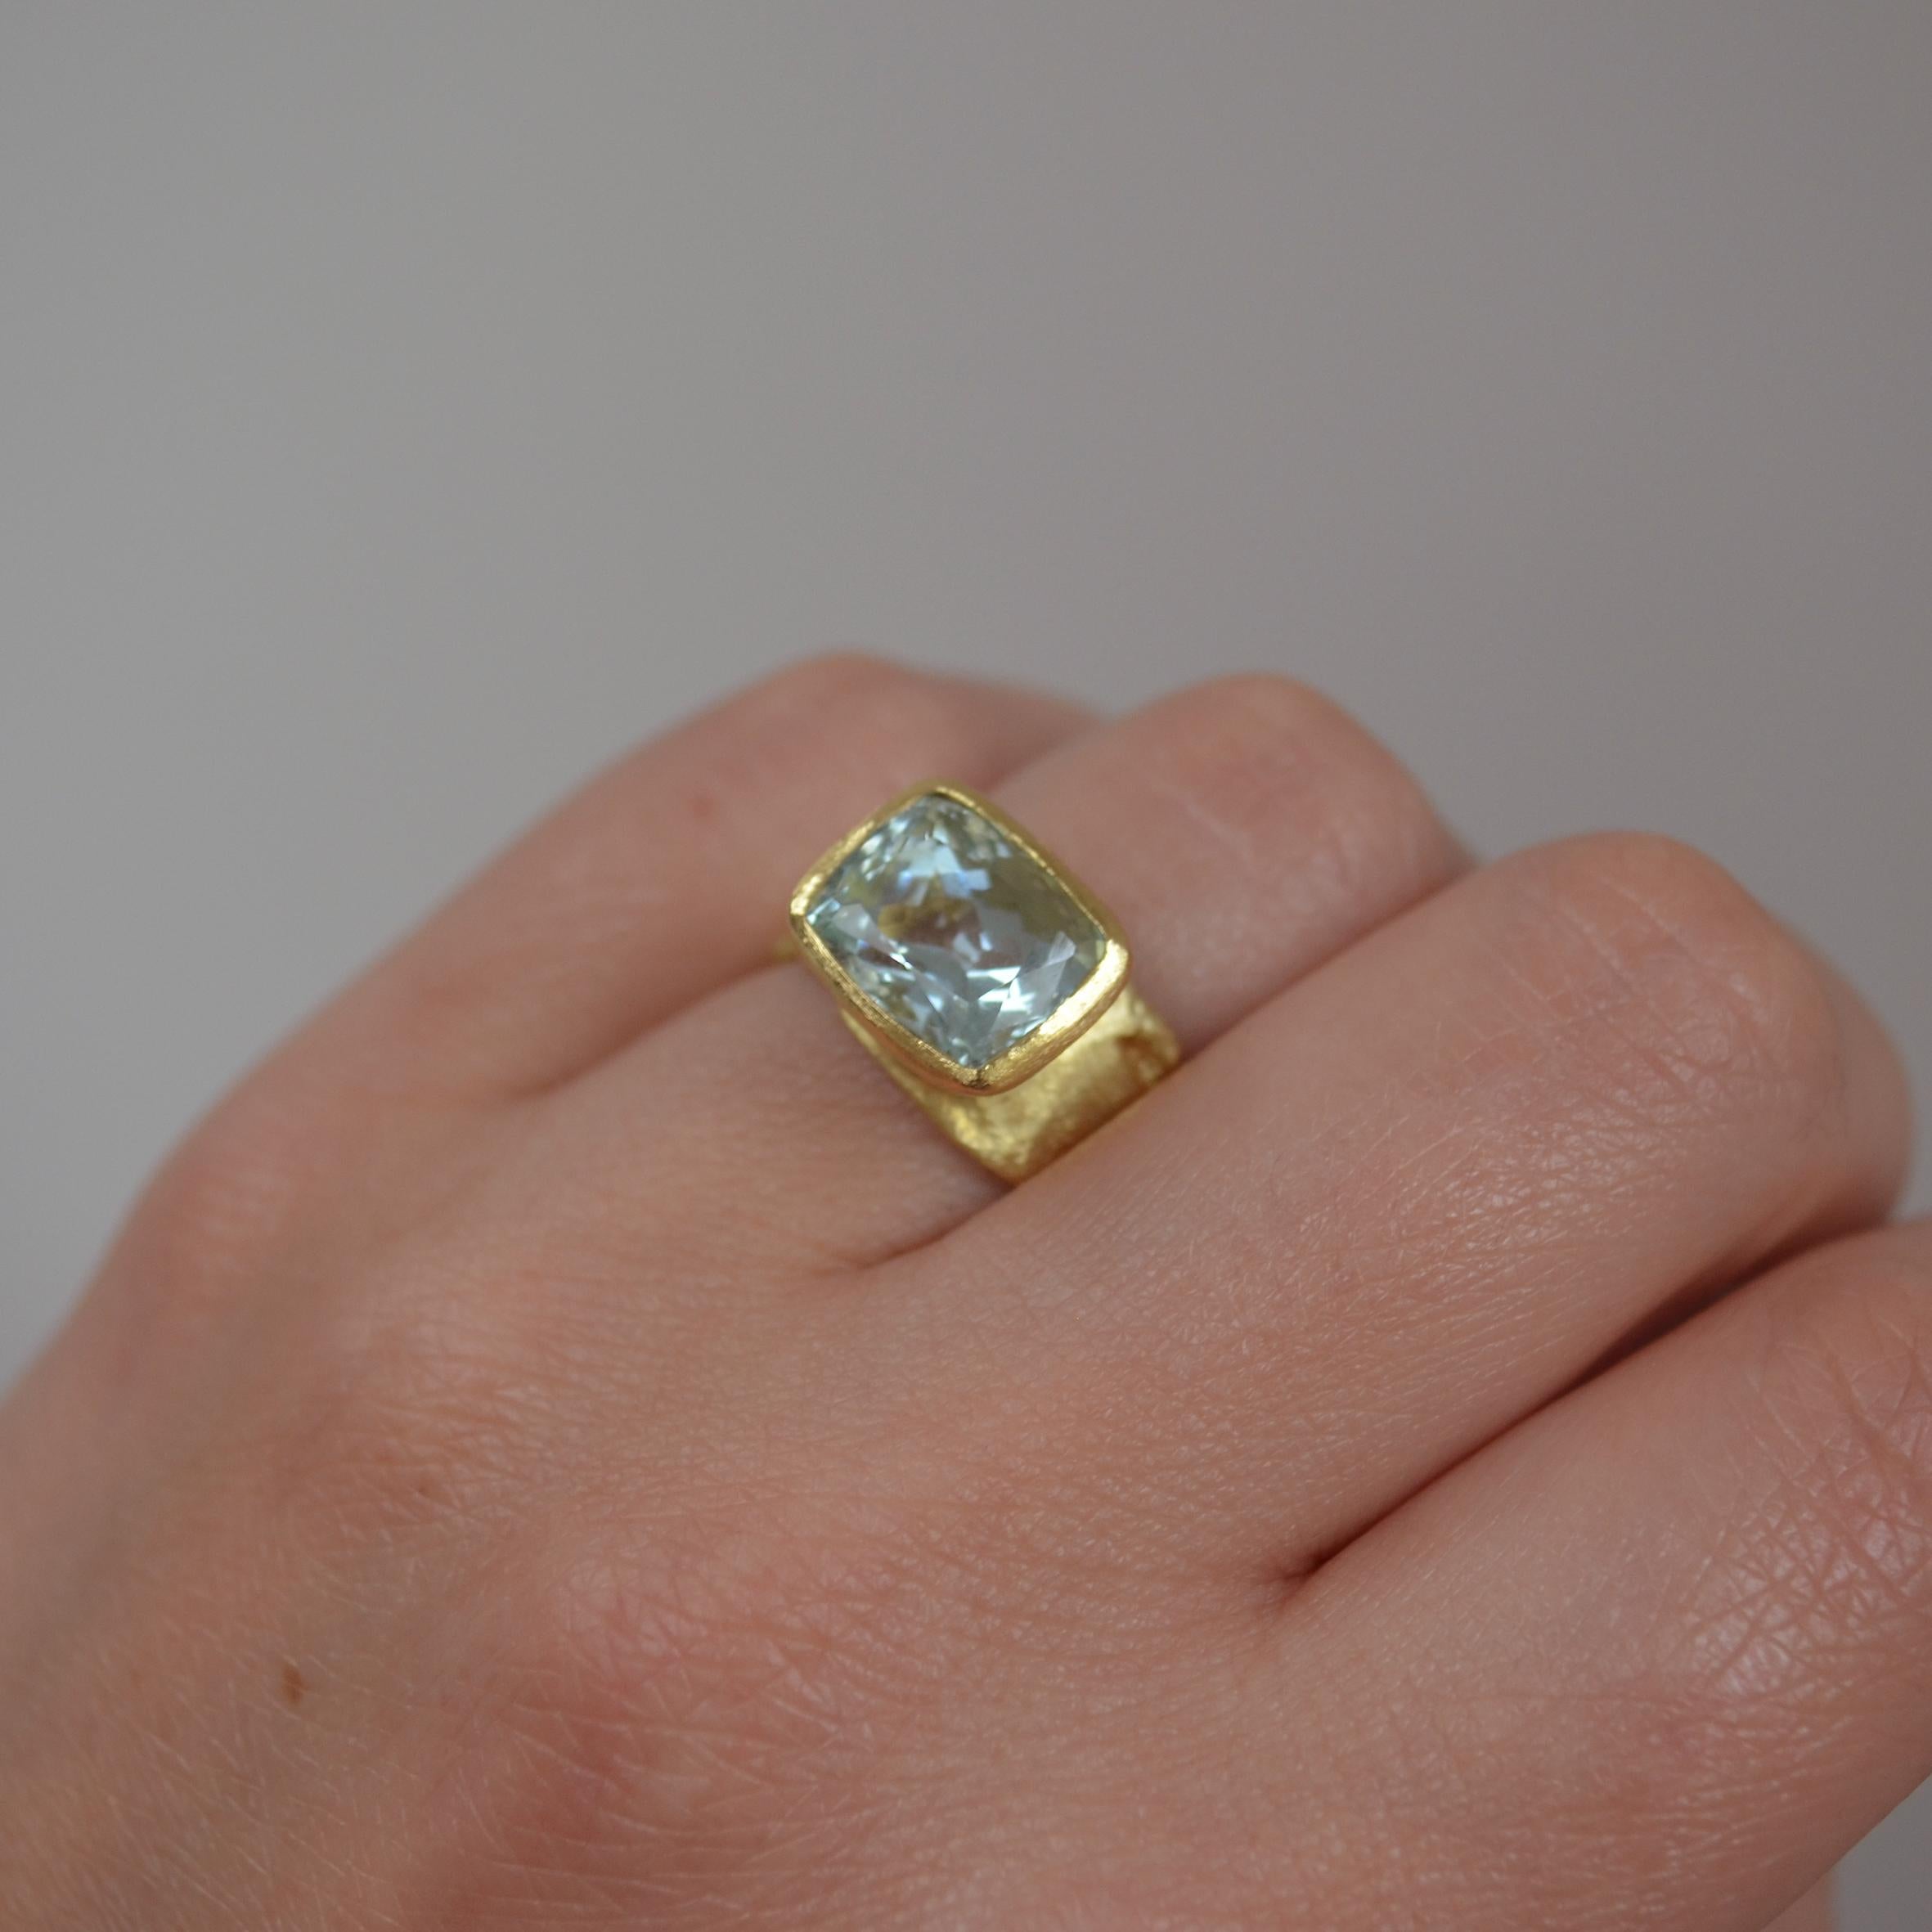 Contemporary Wide Organic Textured Aquamarine Ring Handmade by Disa Allsopp For Sale